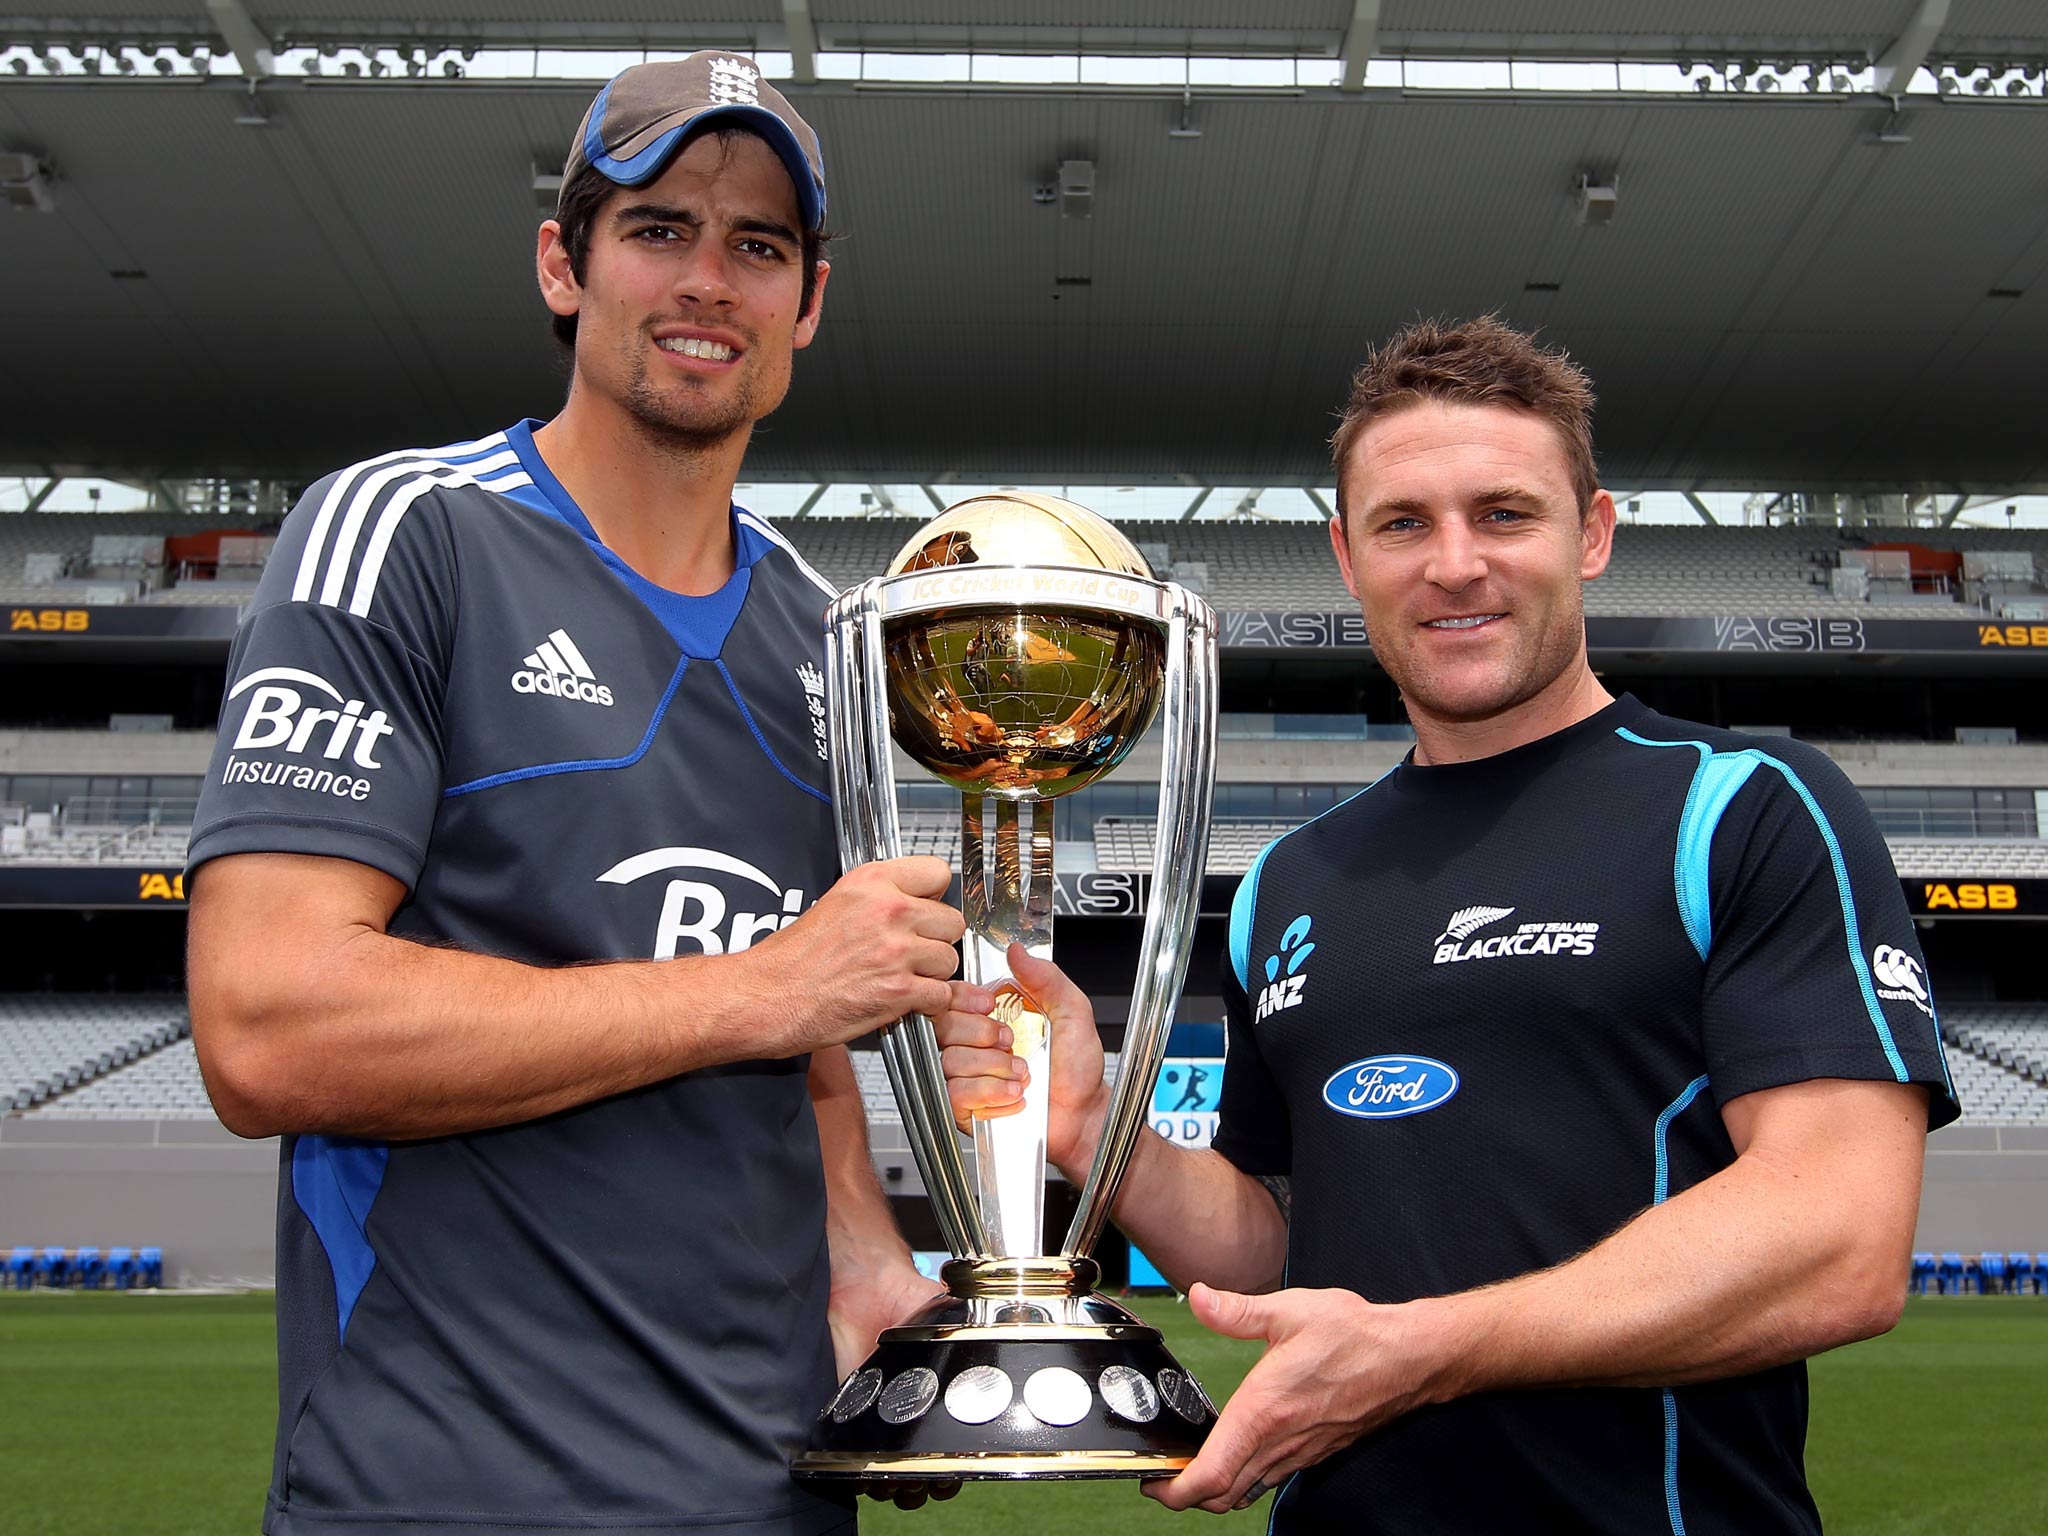 England captain Alastair Cook (left) and New Zealand captain Brendon McCullum (right) pose with the Cricket World Cup Trophy